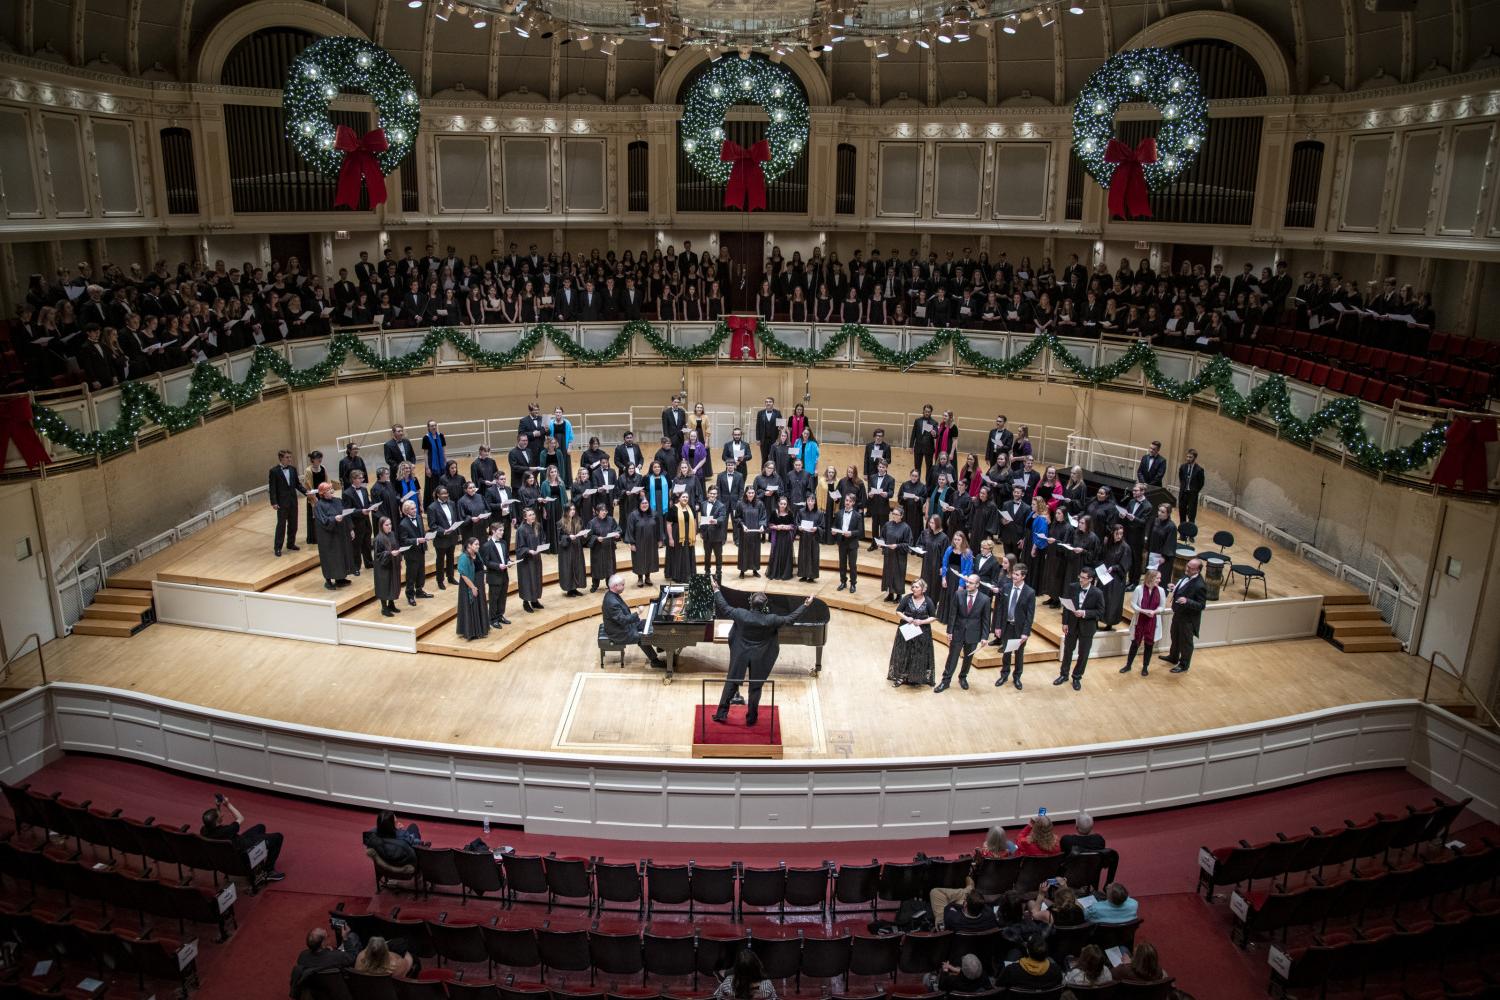 The <a href='http://bax.infosecureredteam.com'>bv伟德ios下载</a> Choir performs in the Chicago Symphony Hall.